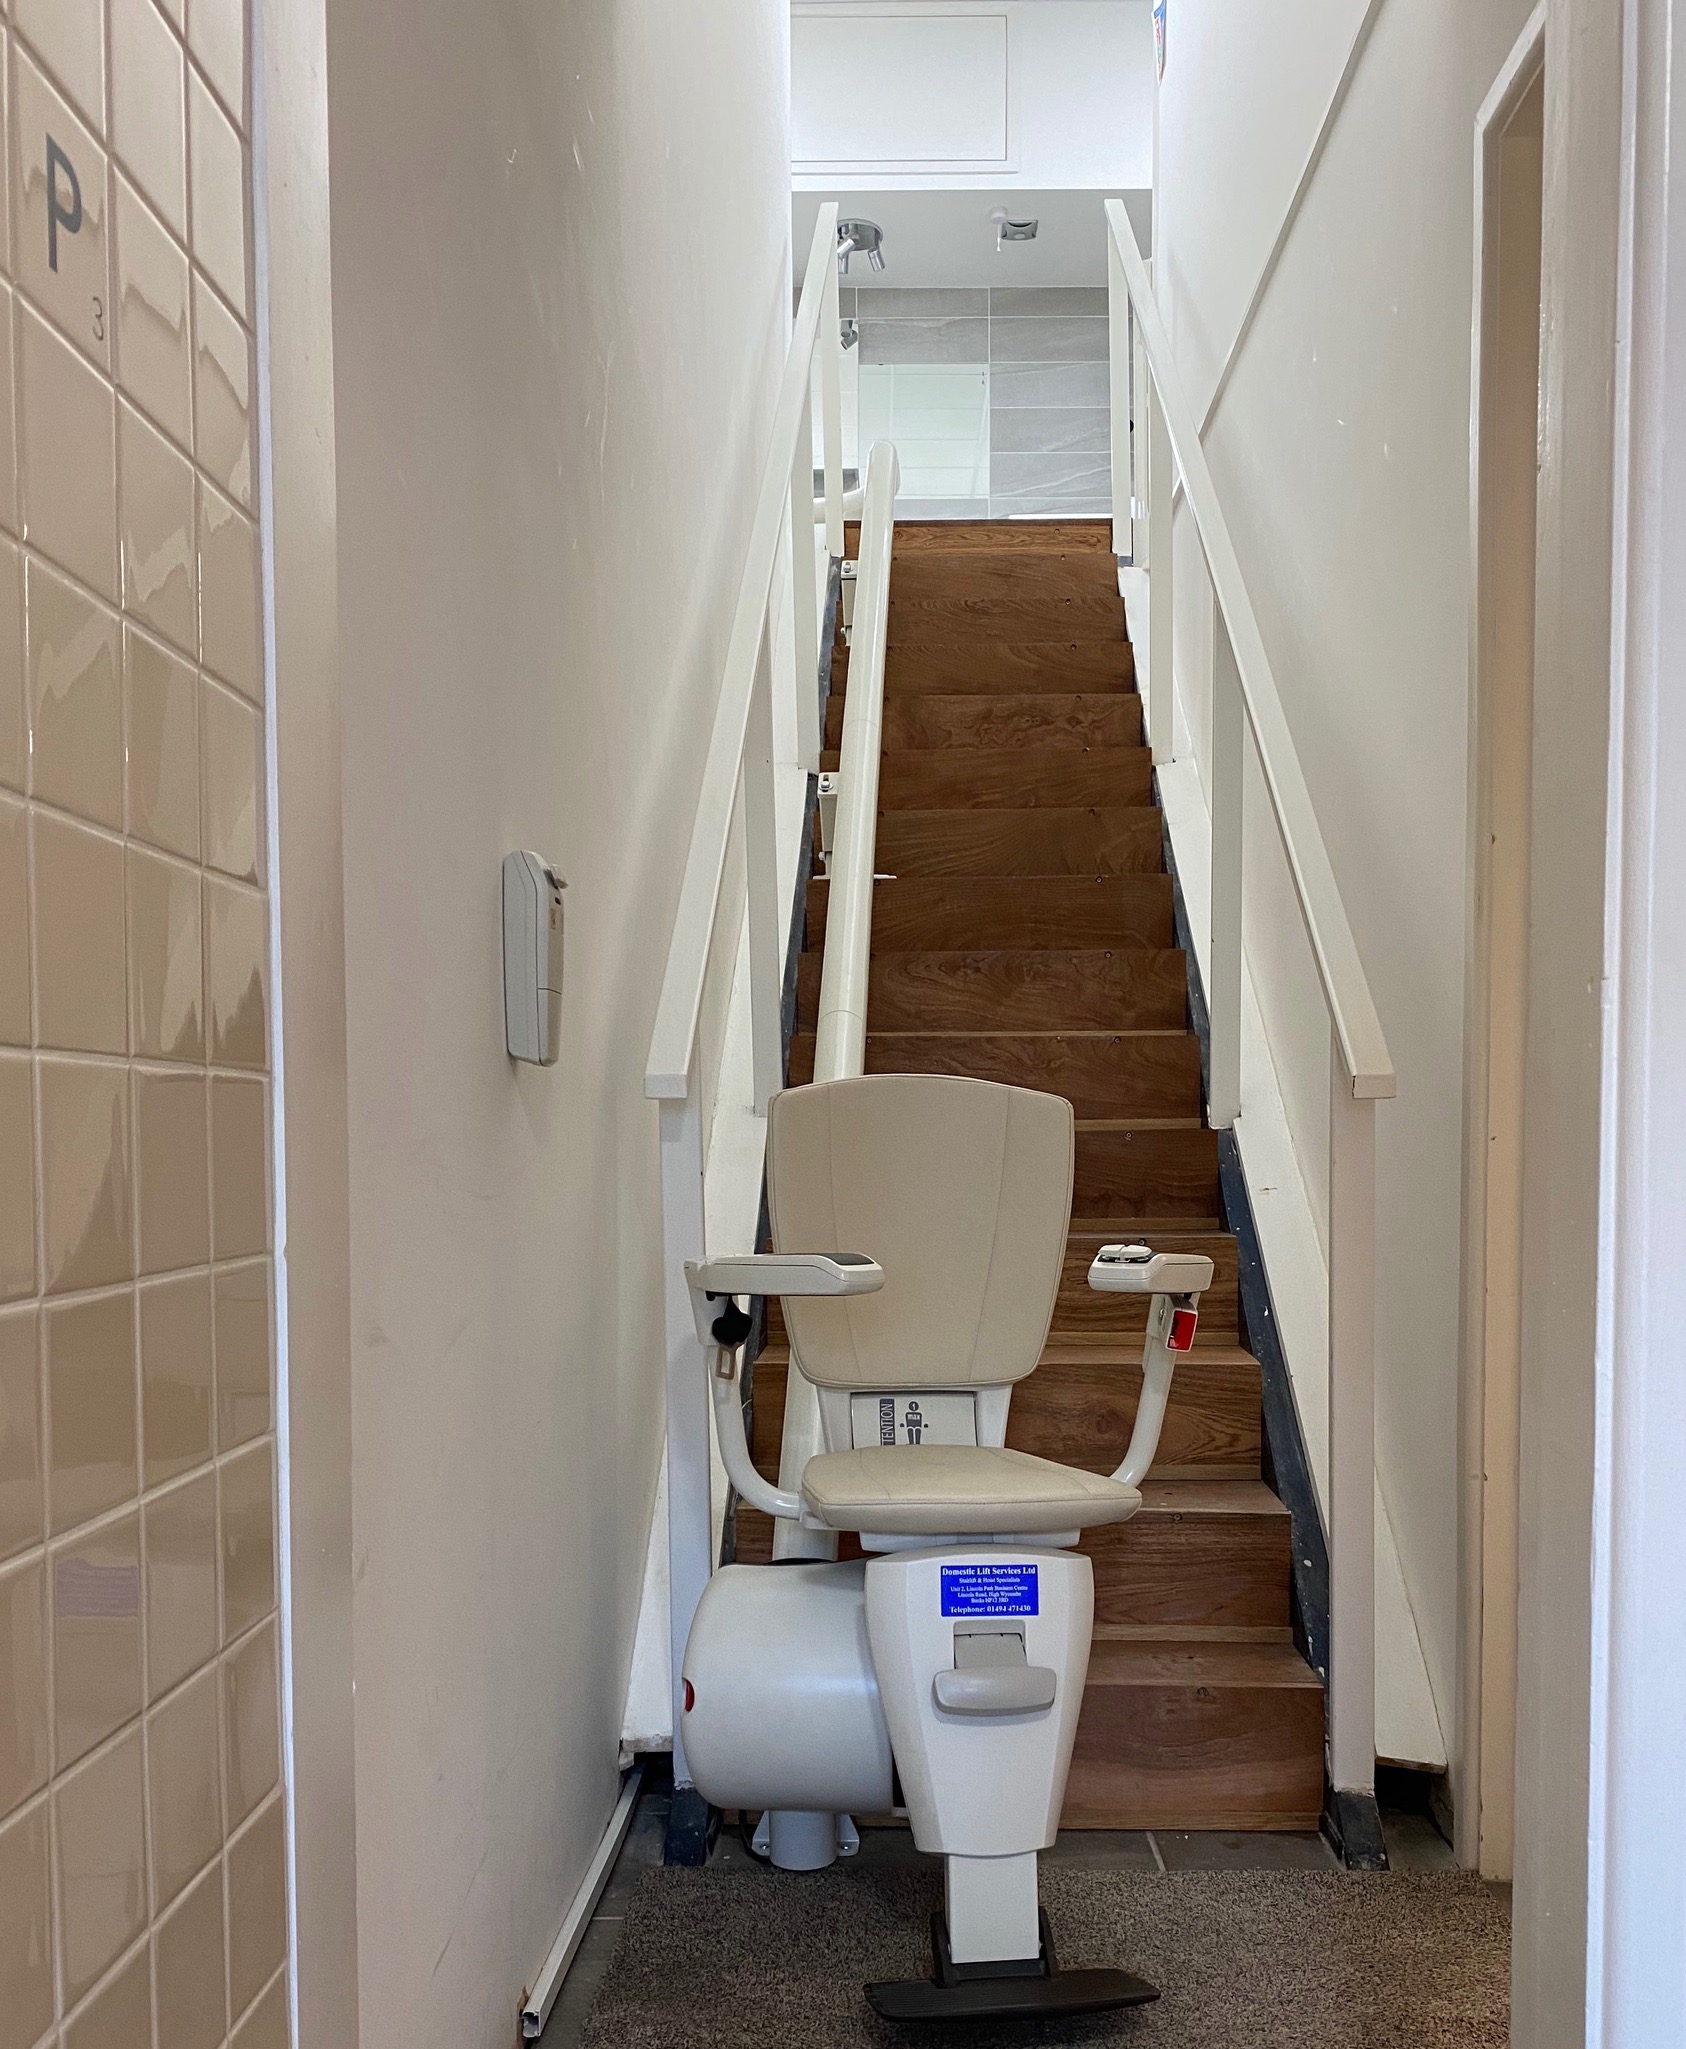 We offer a stairlift to ensure our clients can access the showroom.